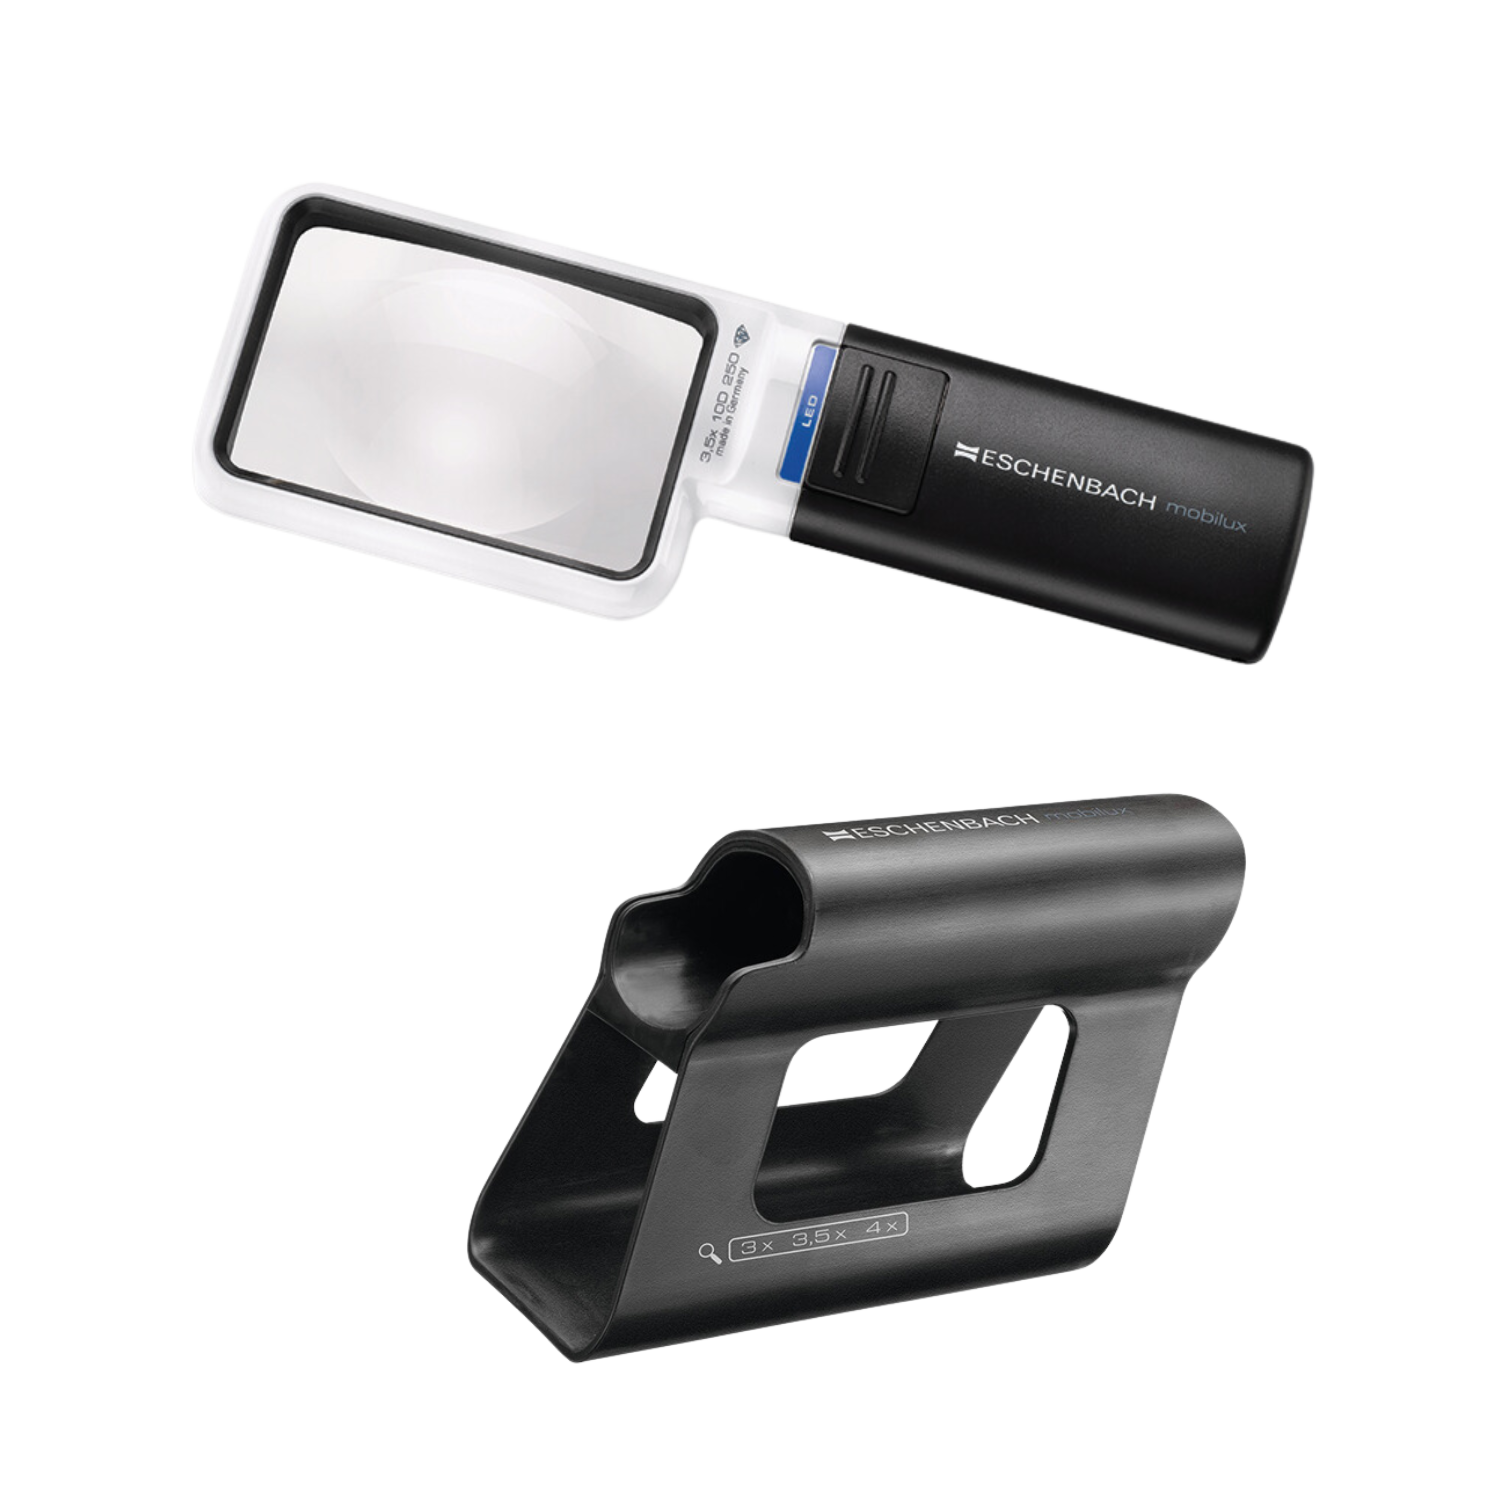 Image of the 3.5x rectangular Mobilux handheld magnifier with Mobase stand from Eschenbach.